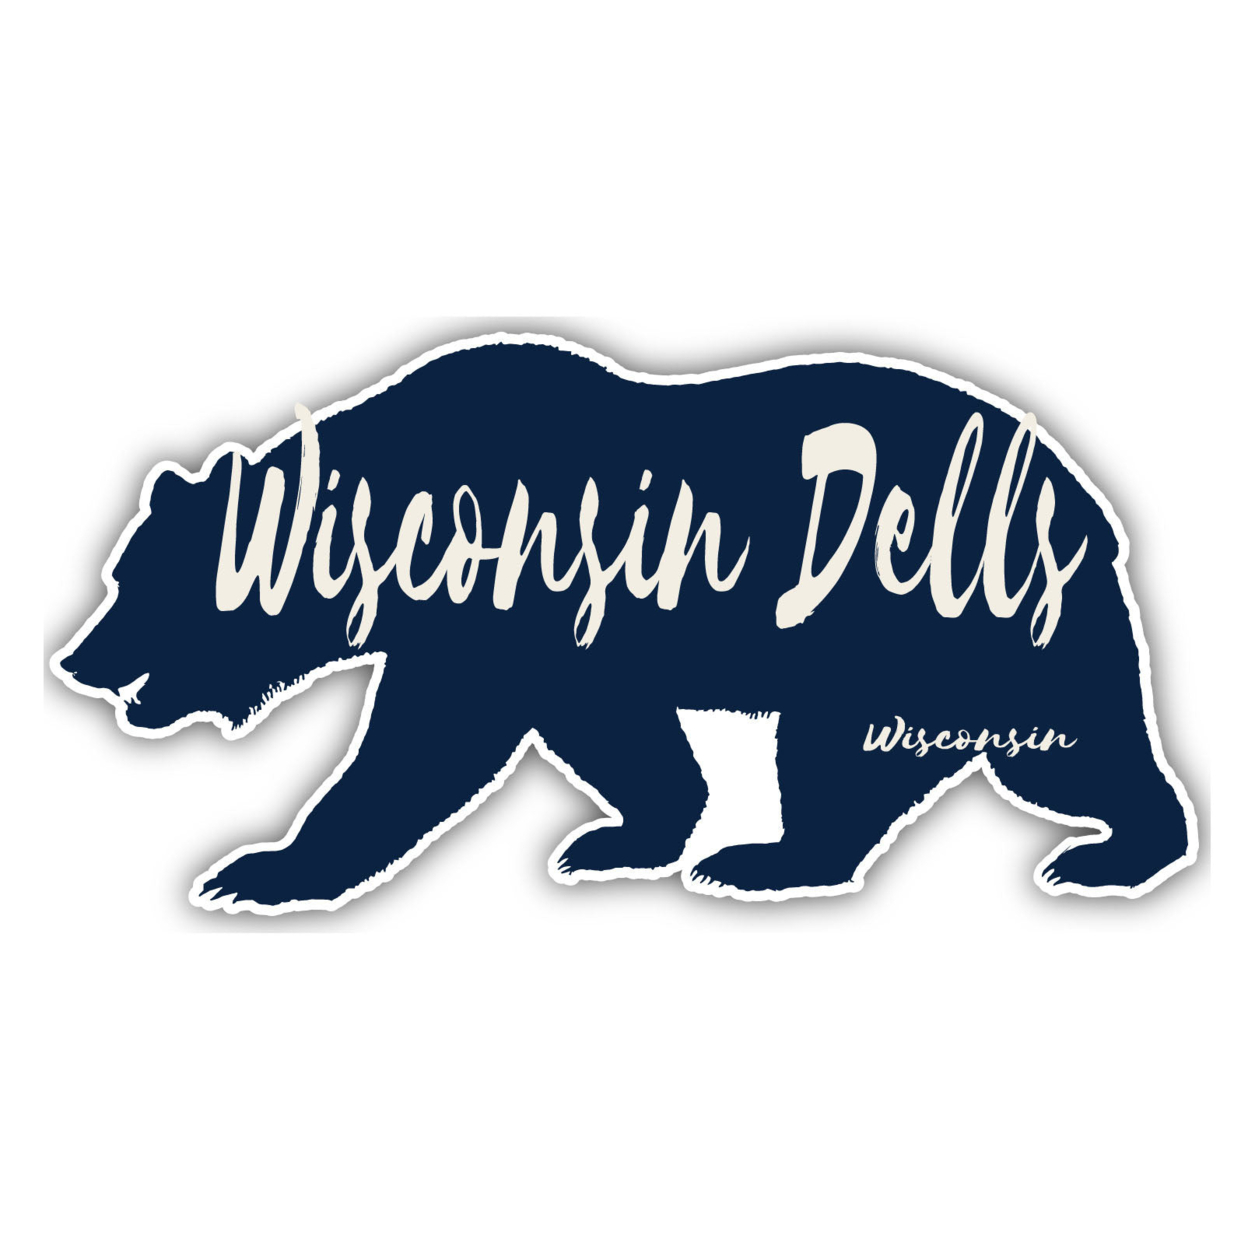 Wisconsin Dells Wisconsin Souvenir Decorative Stickers (Choose Theme And Size) - Single Unit, 2-Inch, Bear